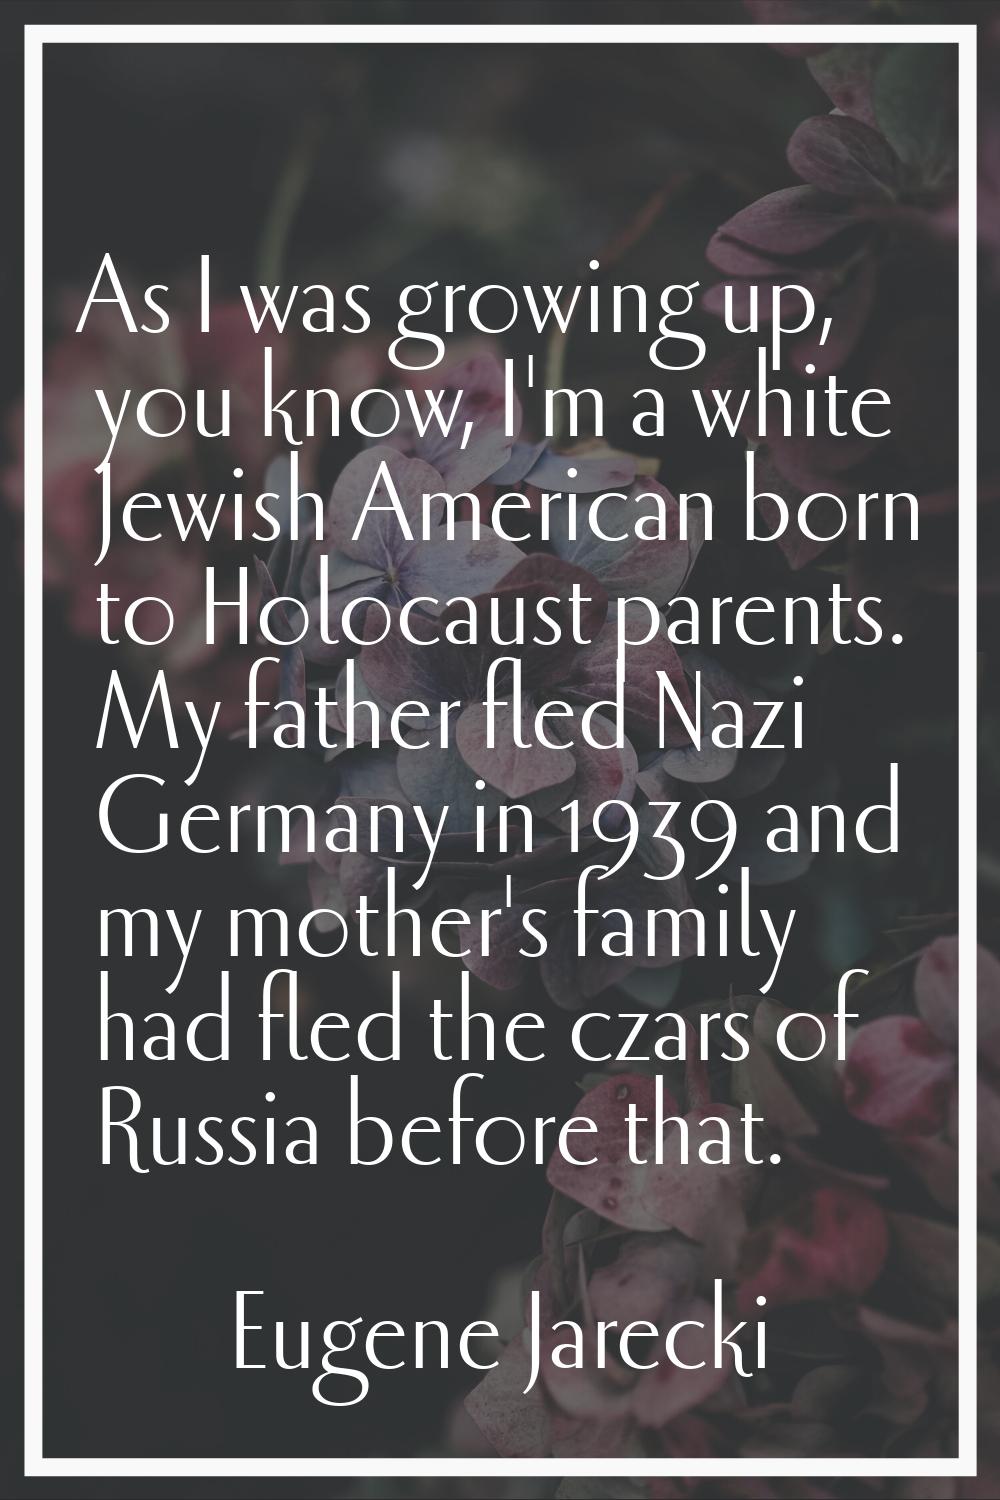 As I was growing up, you know, I'm a white Jewish American born to Holocaust parents. My father fle